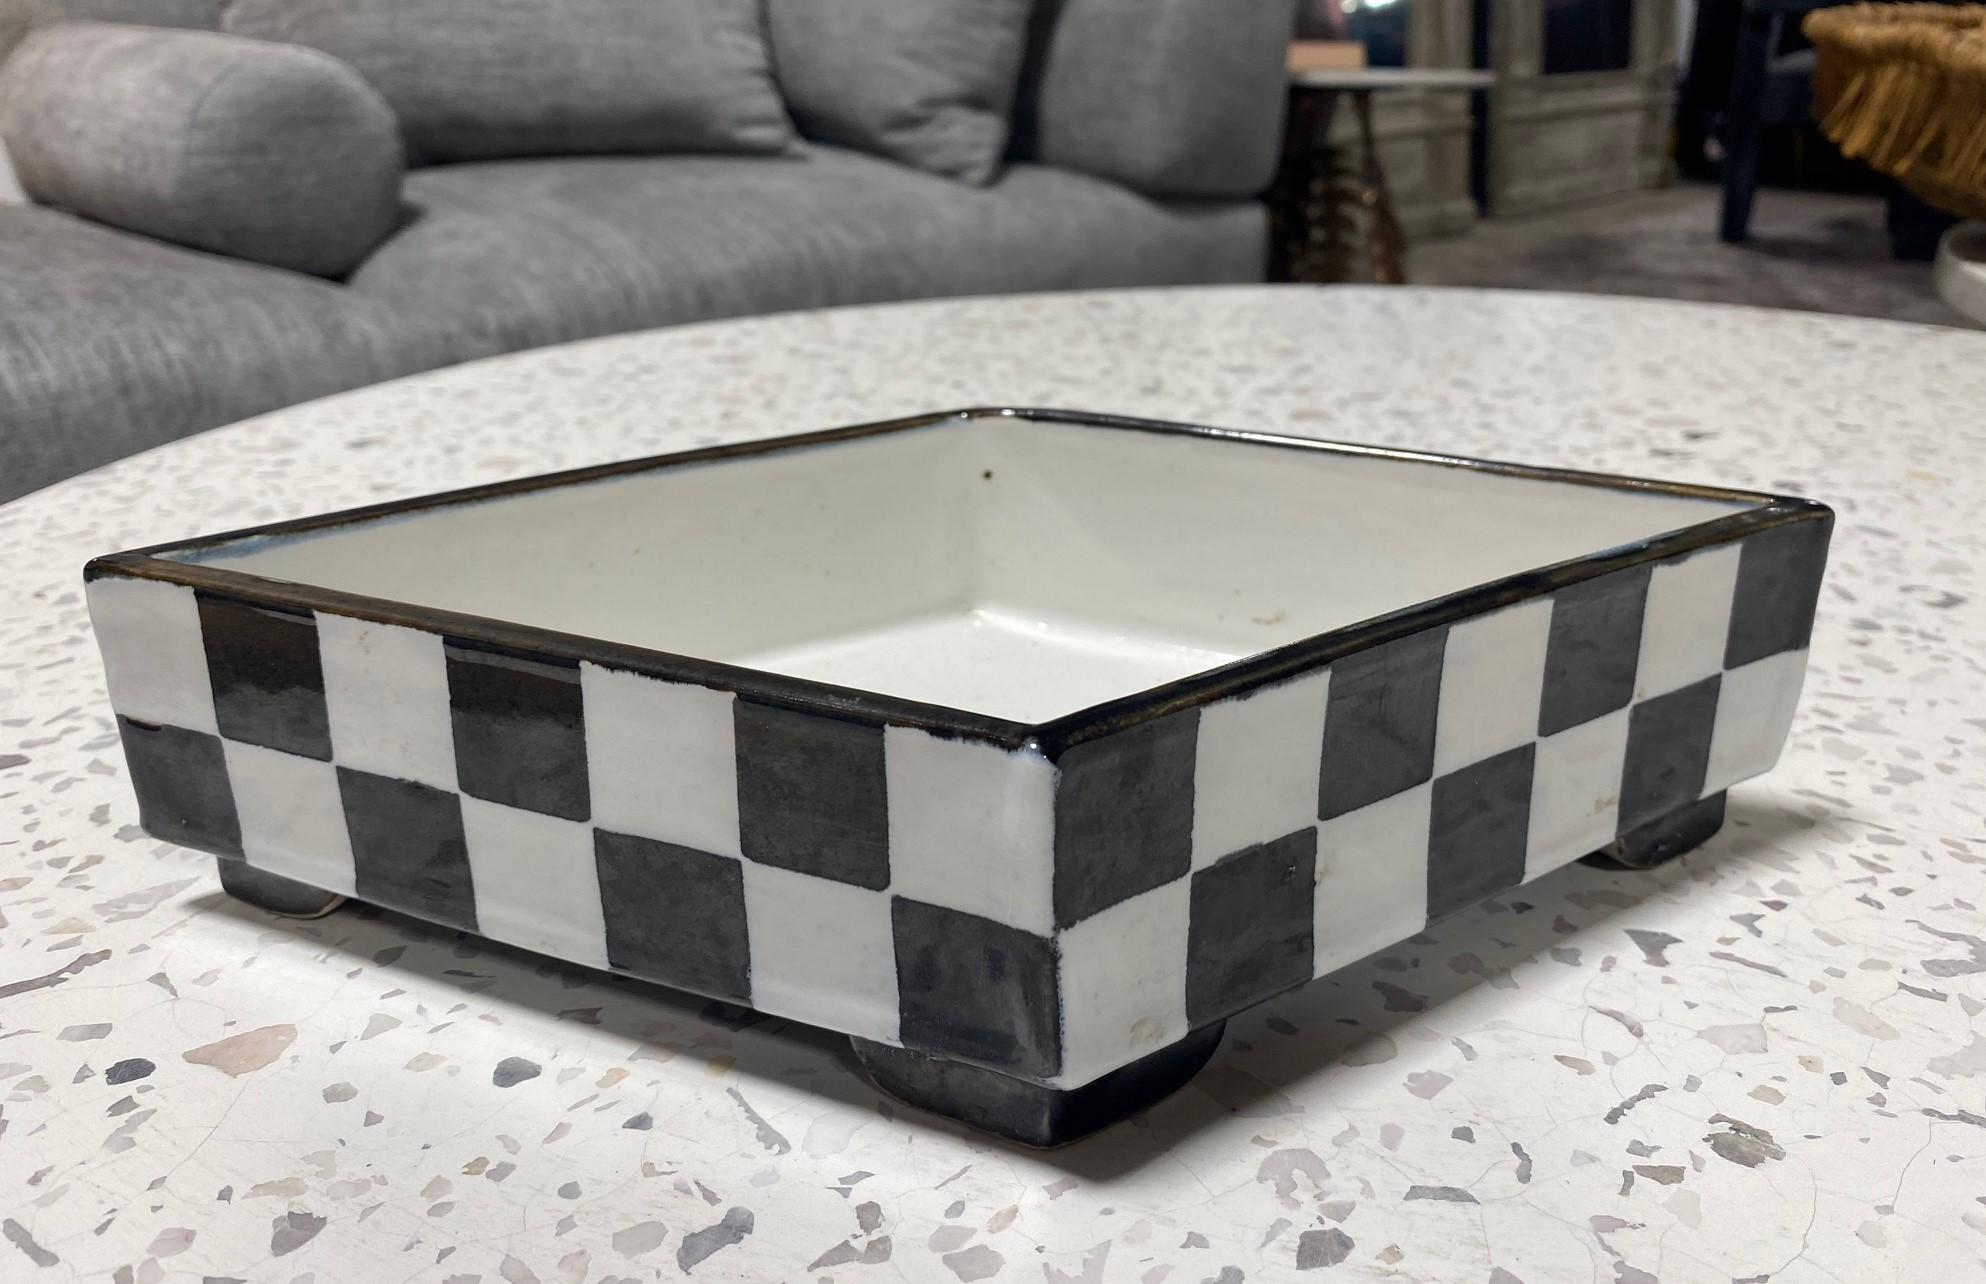 A wonderful, whimsical work by Japanese American, California architectural potter/ artist Kazuko Matthews.

This large black and white checkboard rhombus-shaped bowl/ vessel is signed on the base by Matthews. The piece is reminiscent of the works